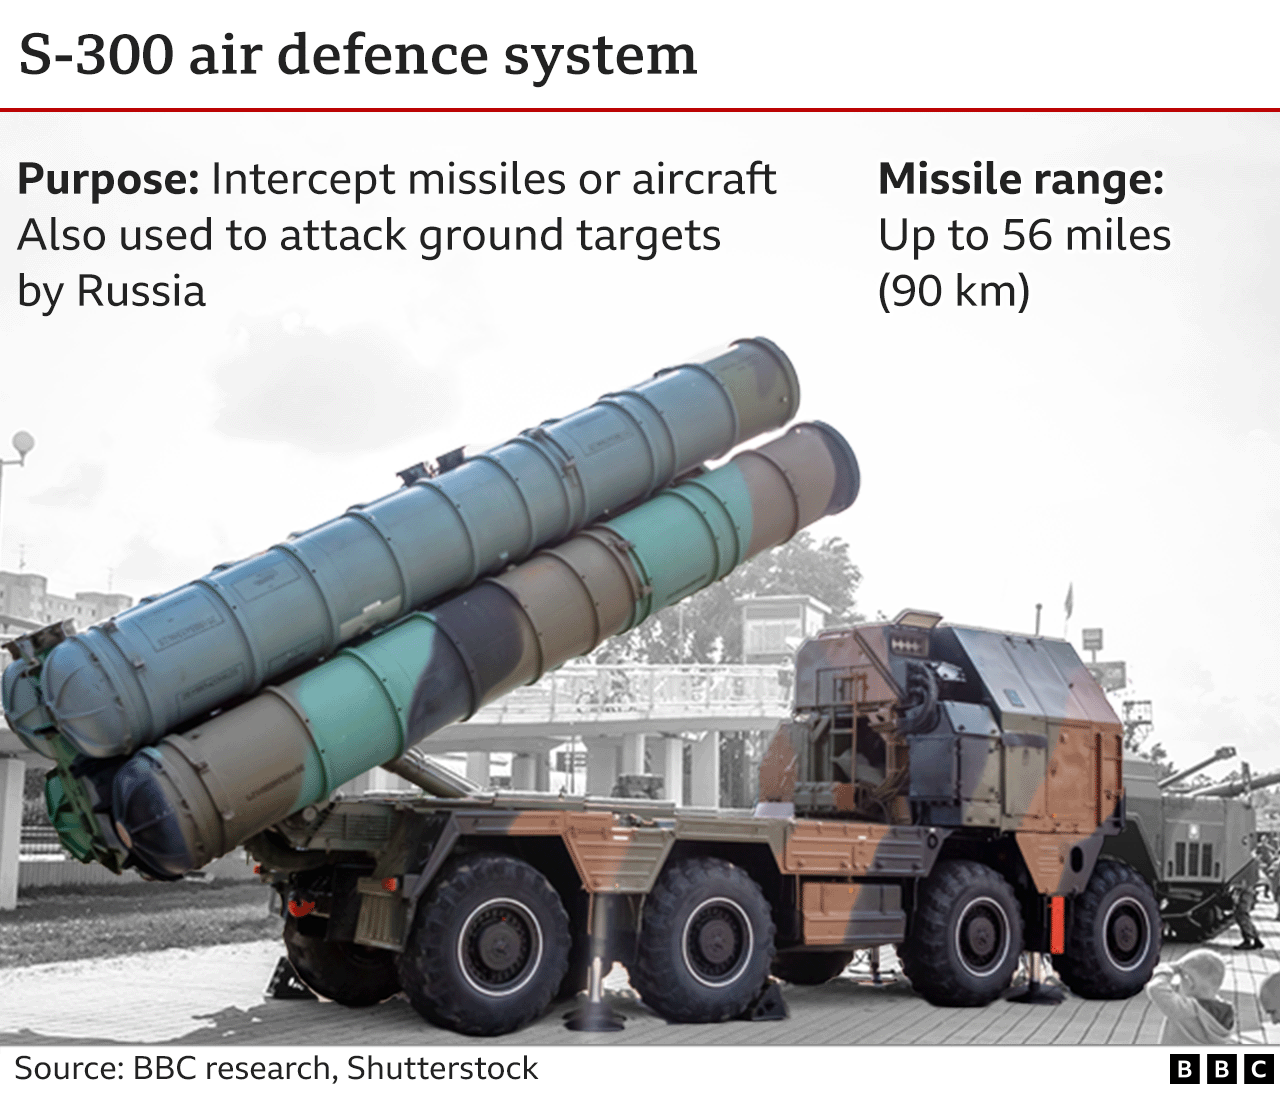 Graphic showing details of the S-300 air defences system.